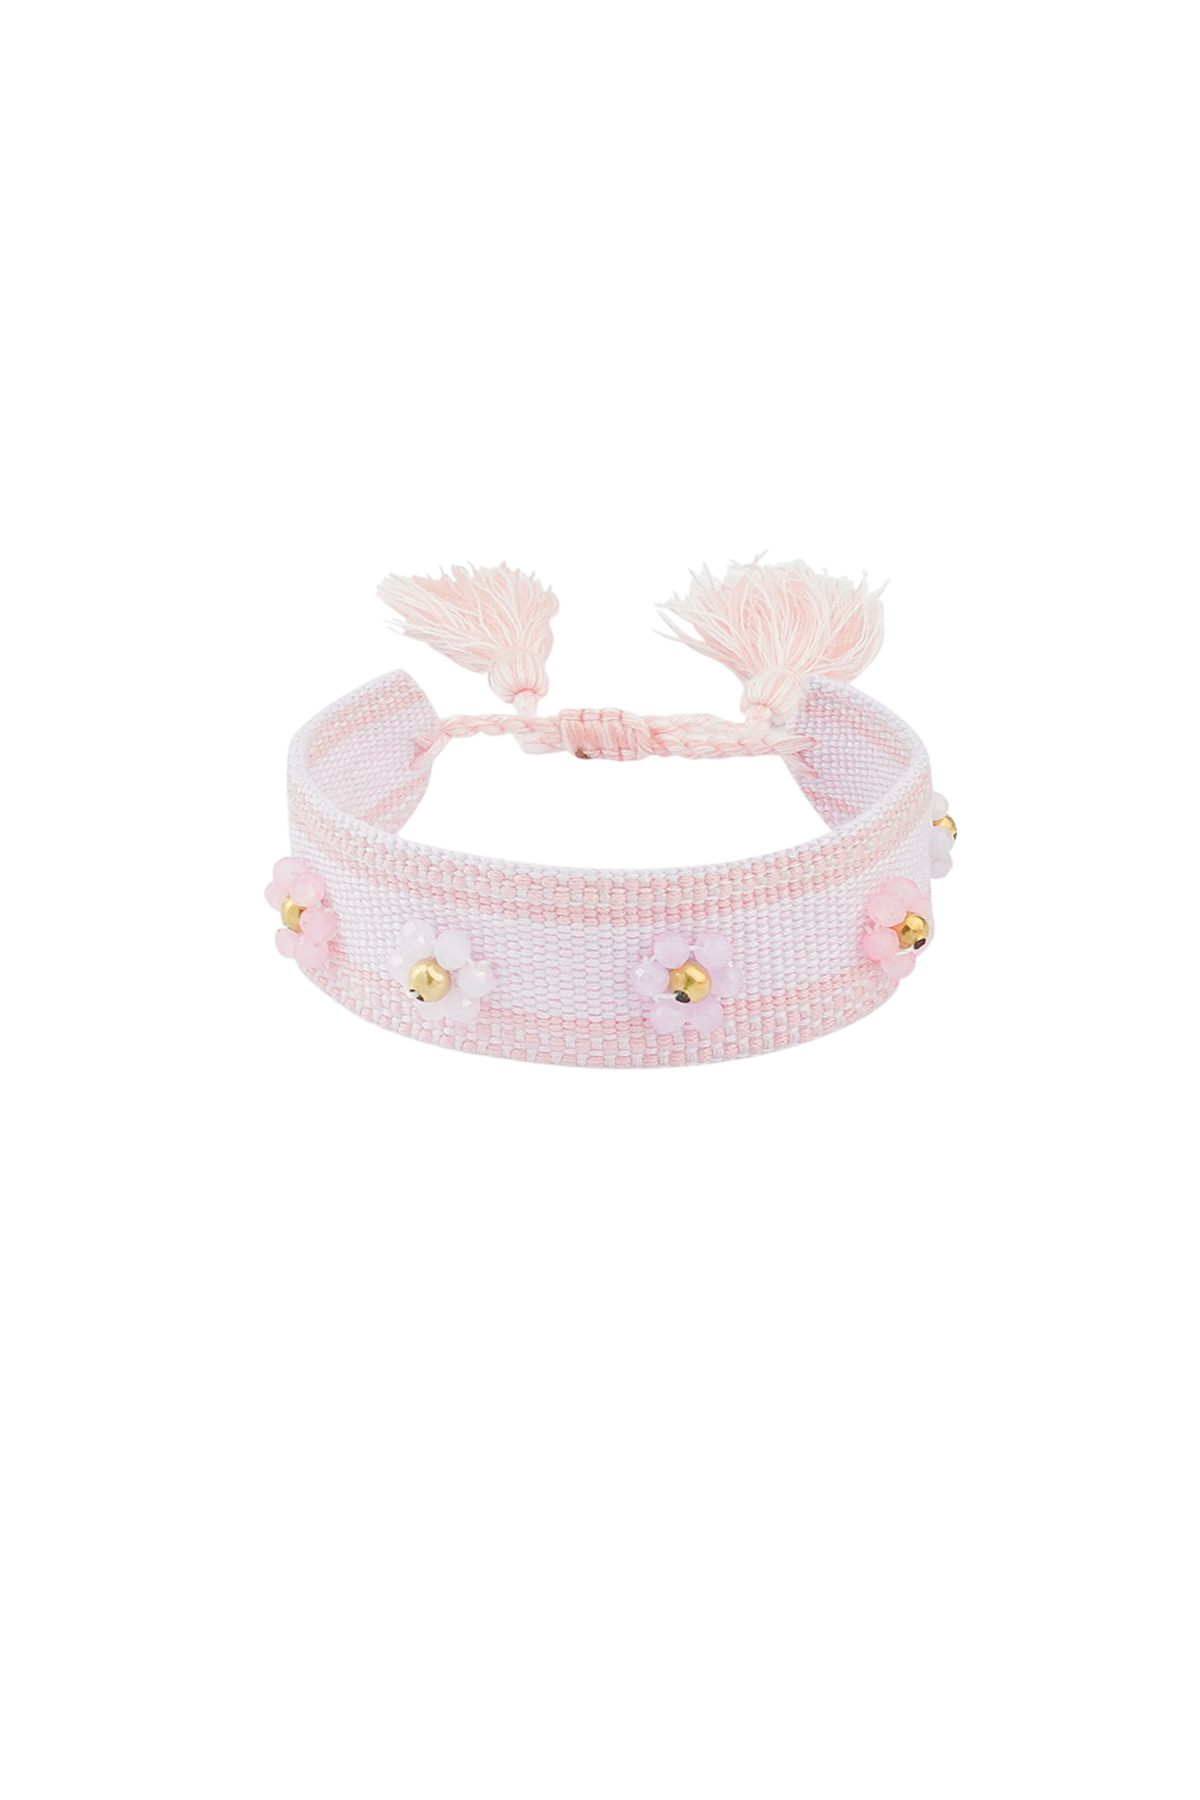 Fabric bracelet with flowers - pale pink 